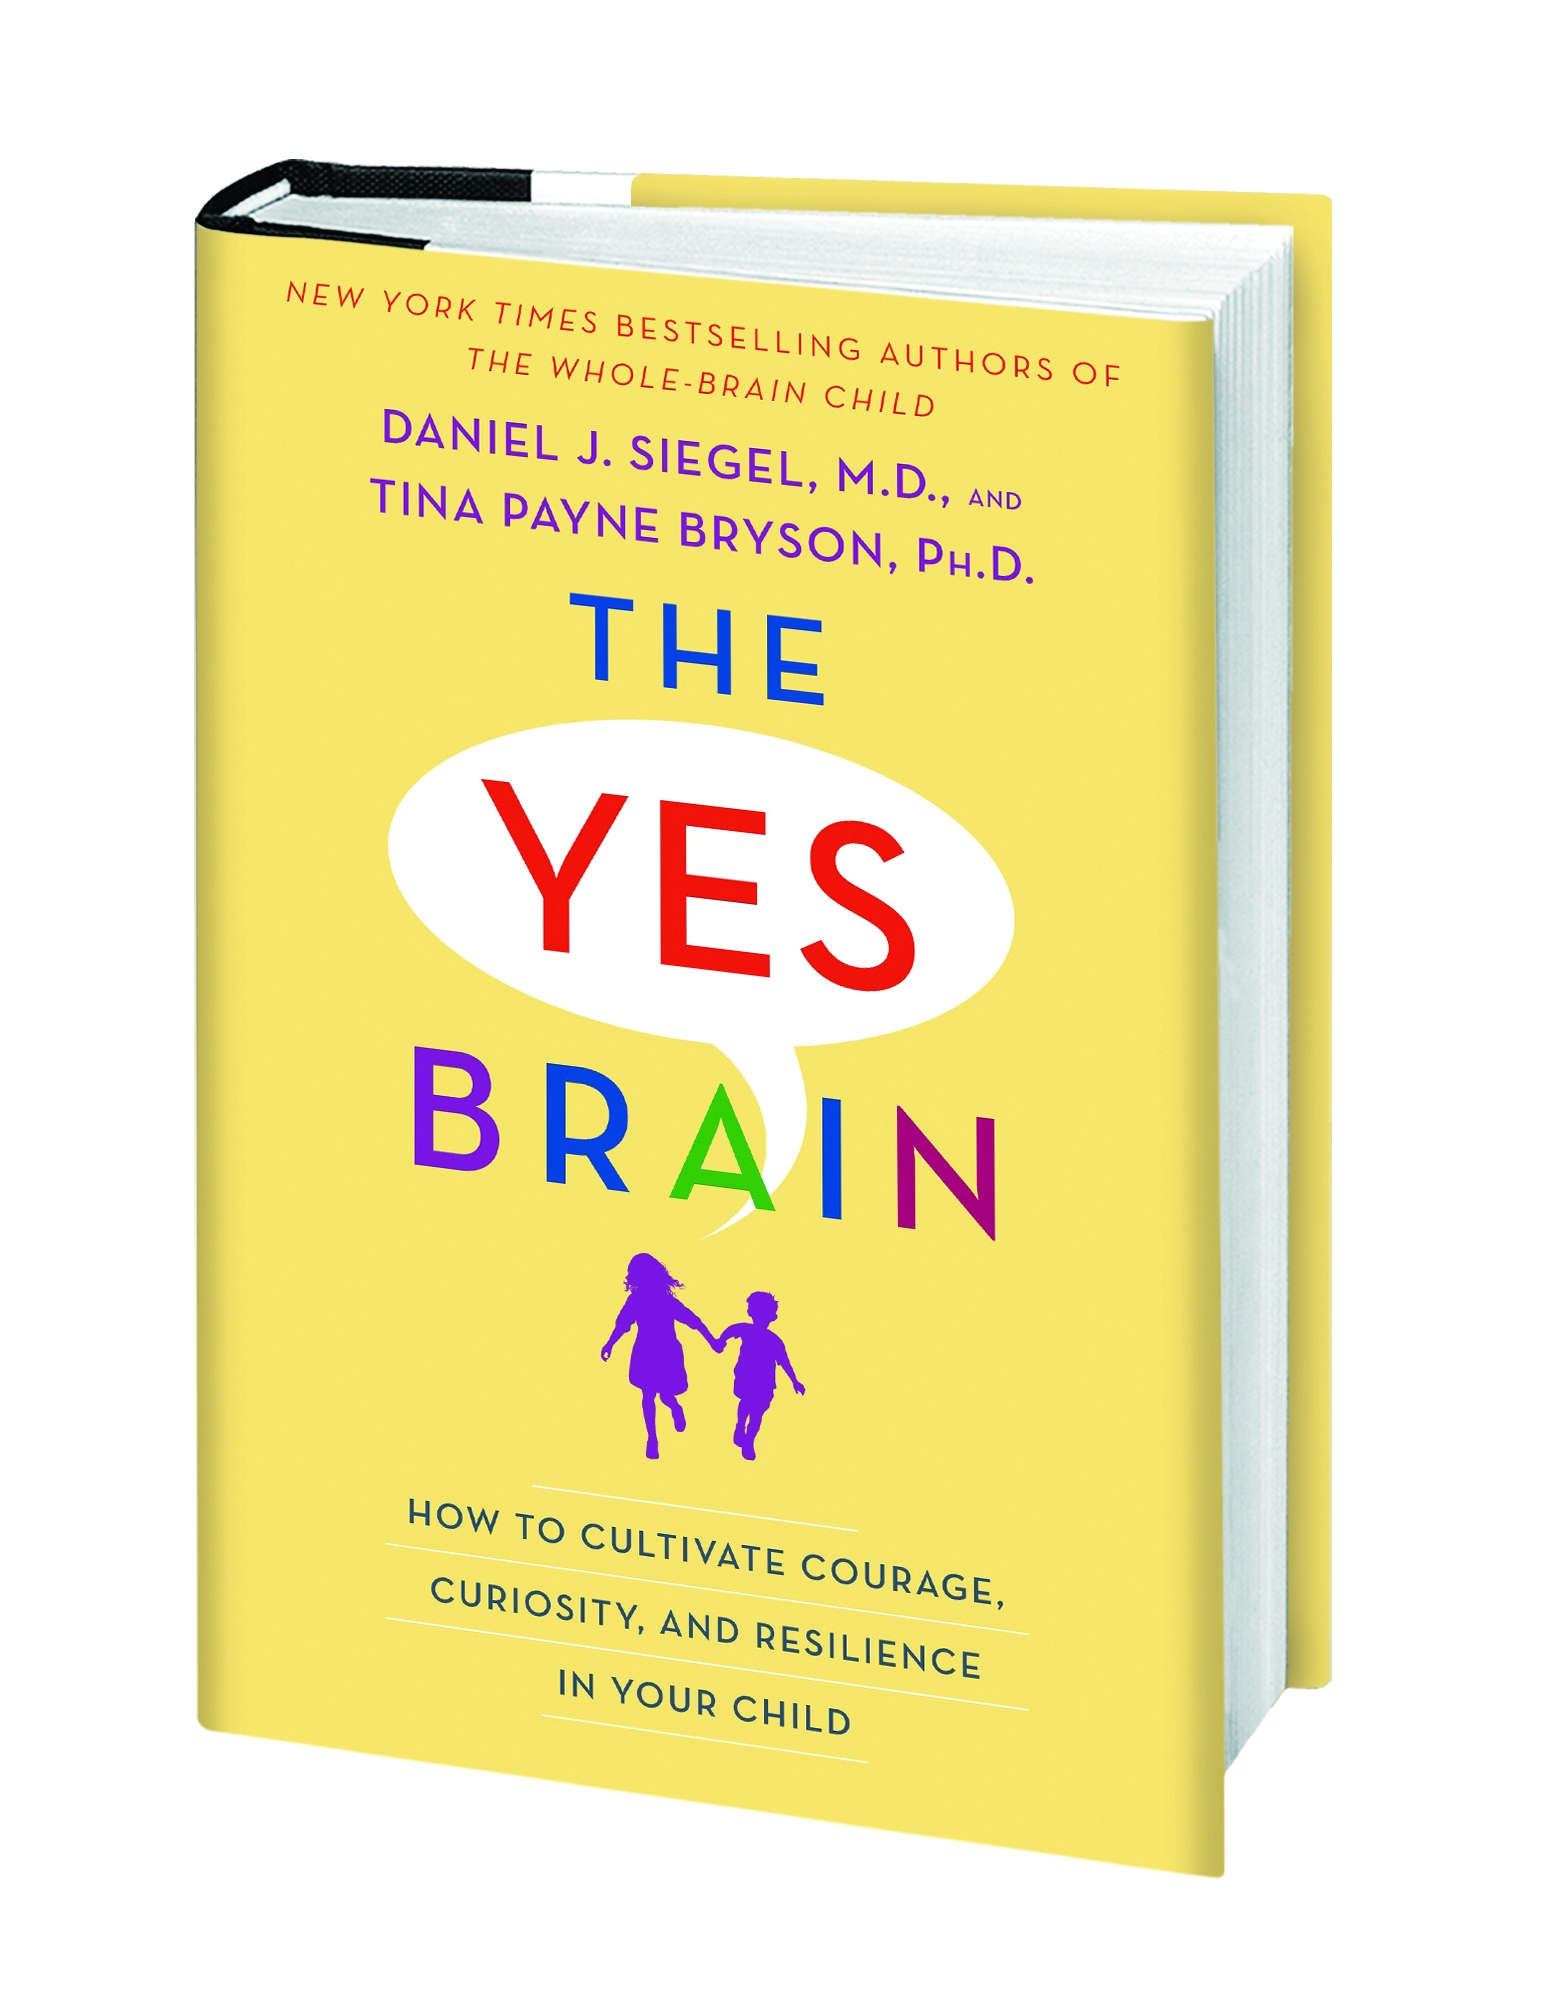 The Yes Brain Book Review